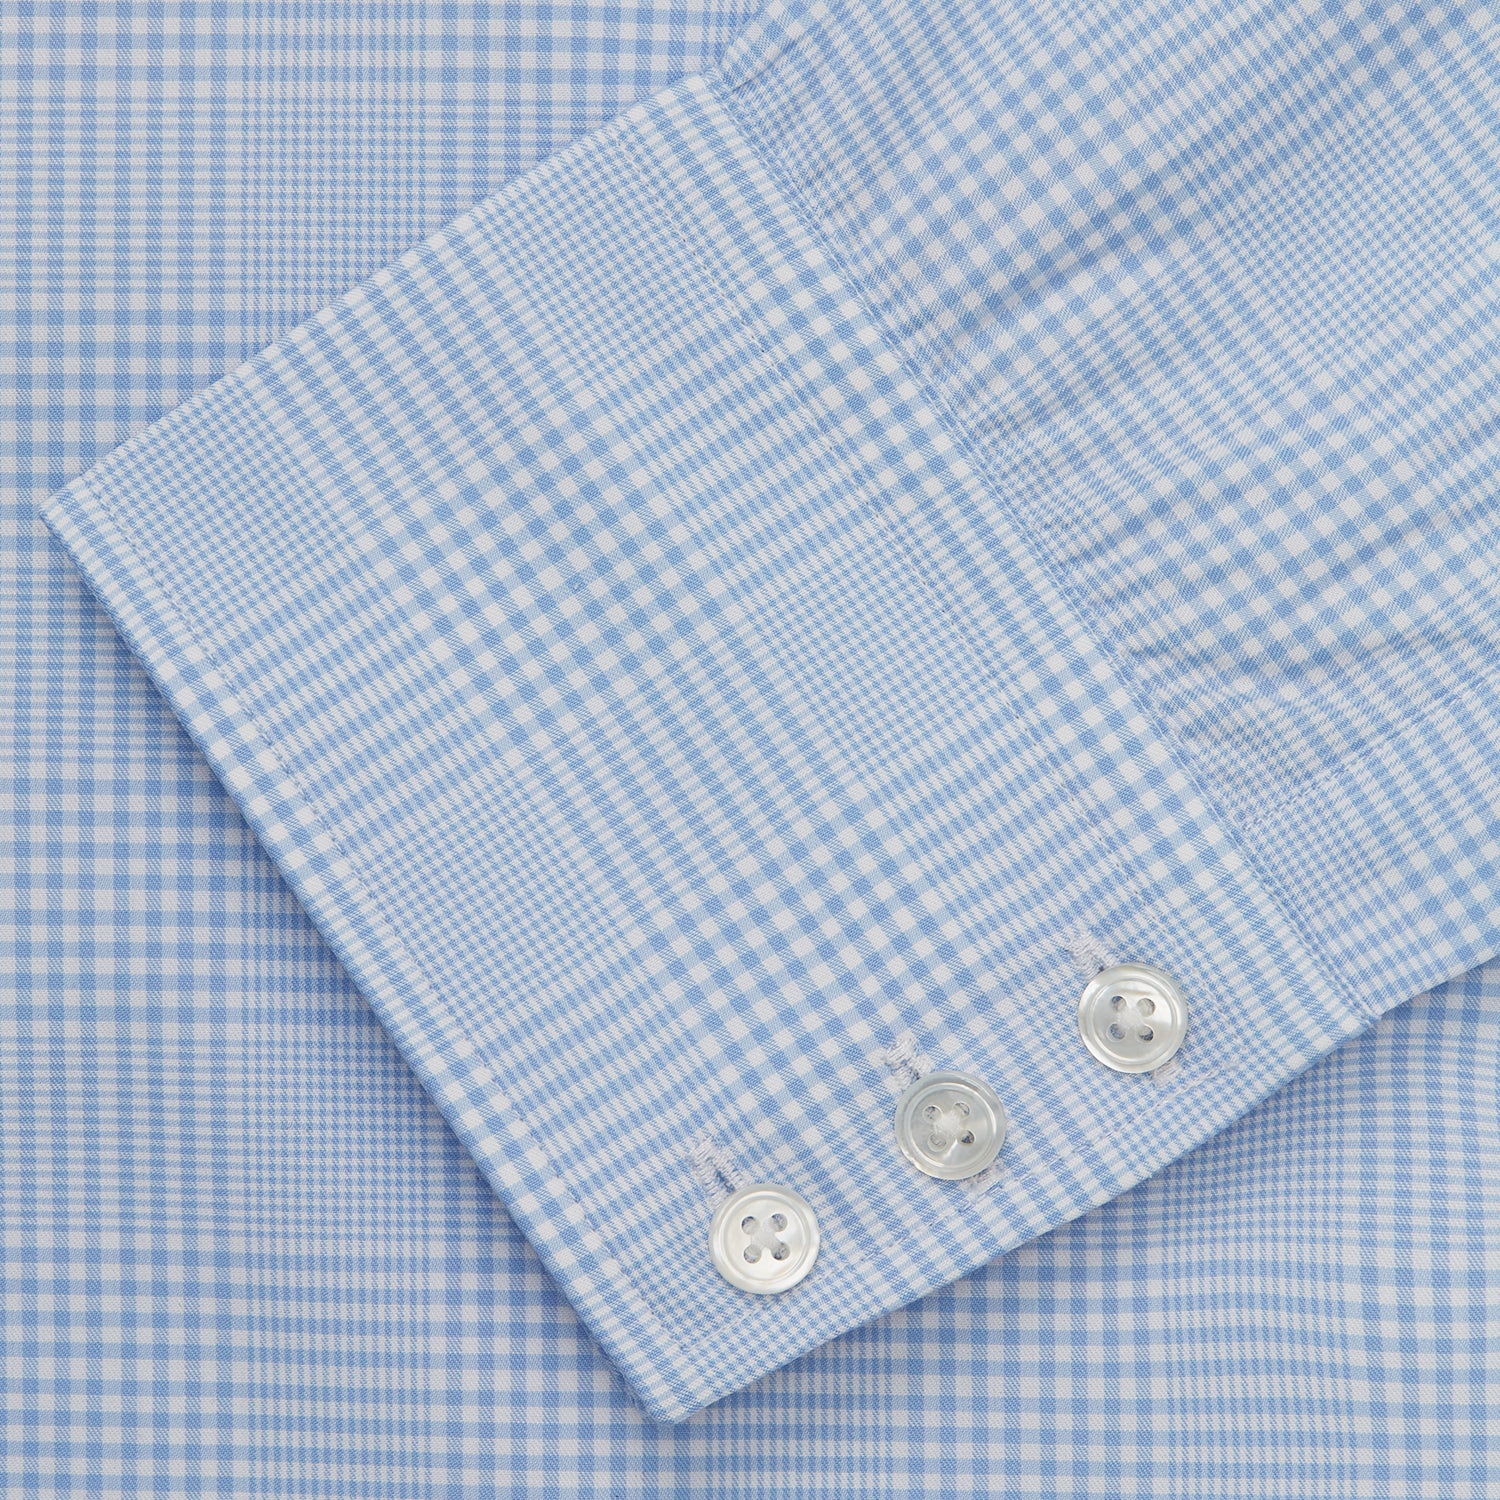 Pale Blue Check Shirt with T&A Collar and 3-Button Cuffs